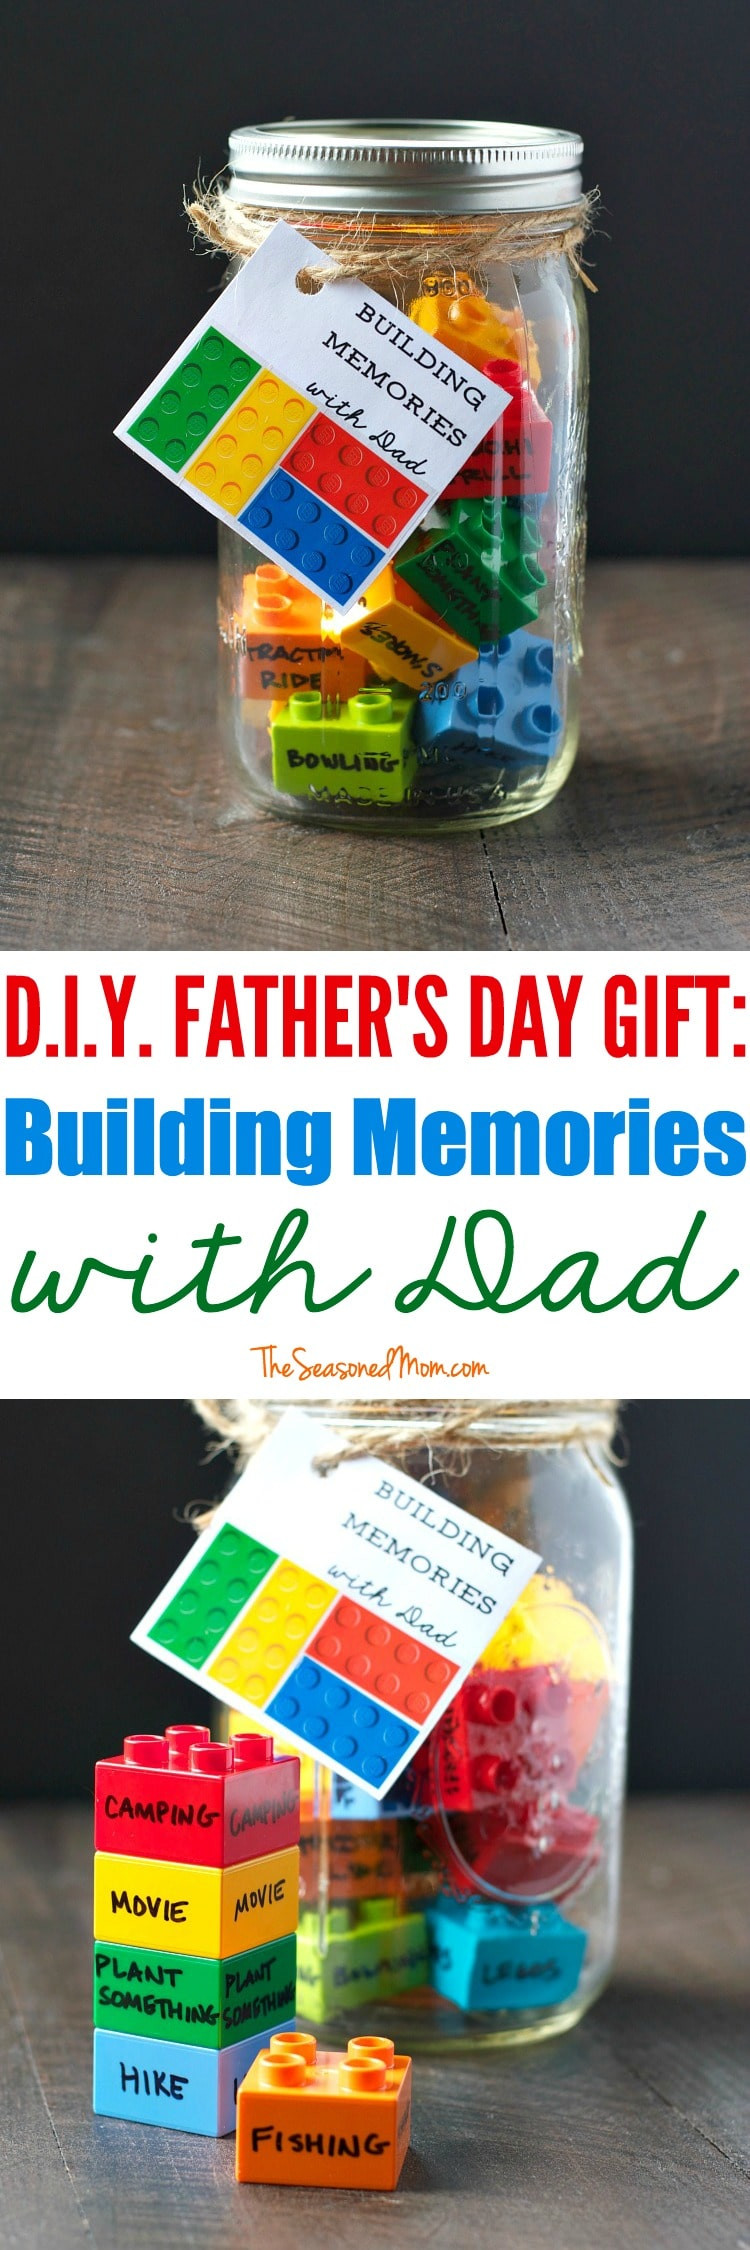 Gifts For Daddy From Kids
 25 Homemade Father s Day Gifts from Kids That Dad Can